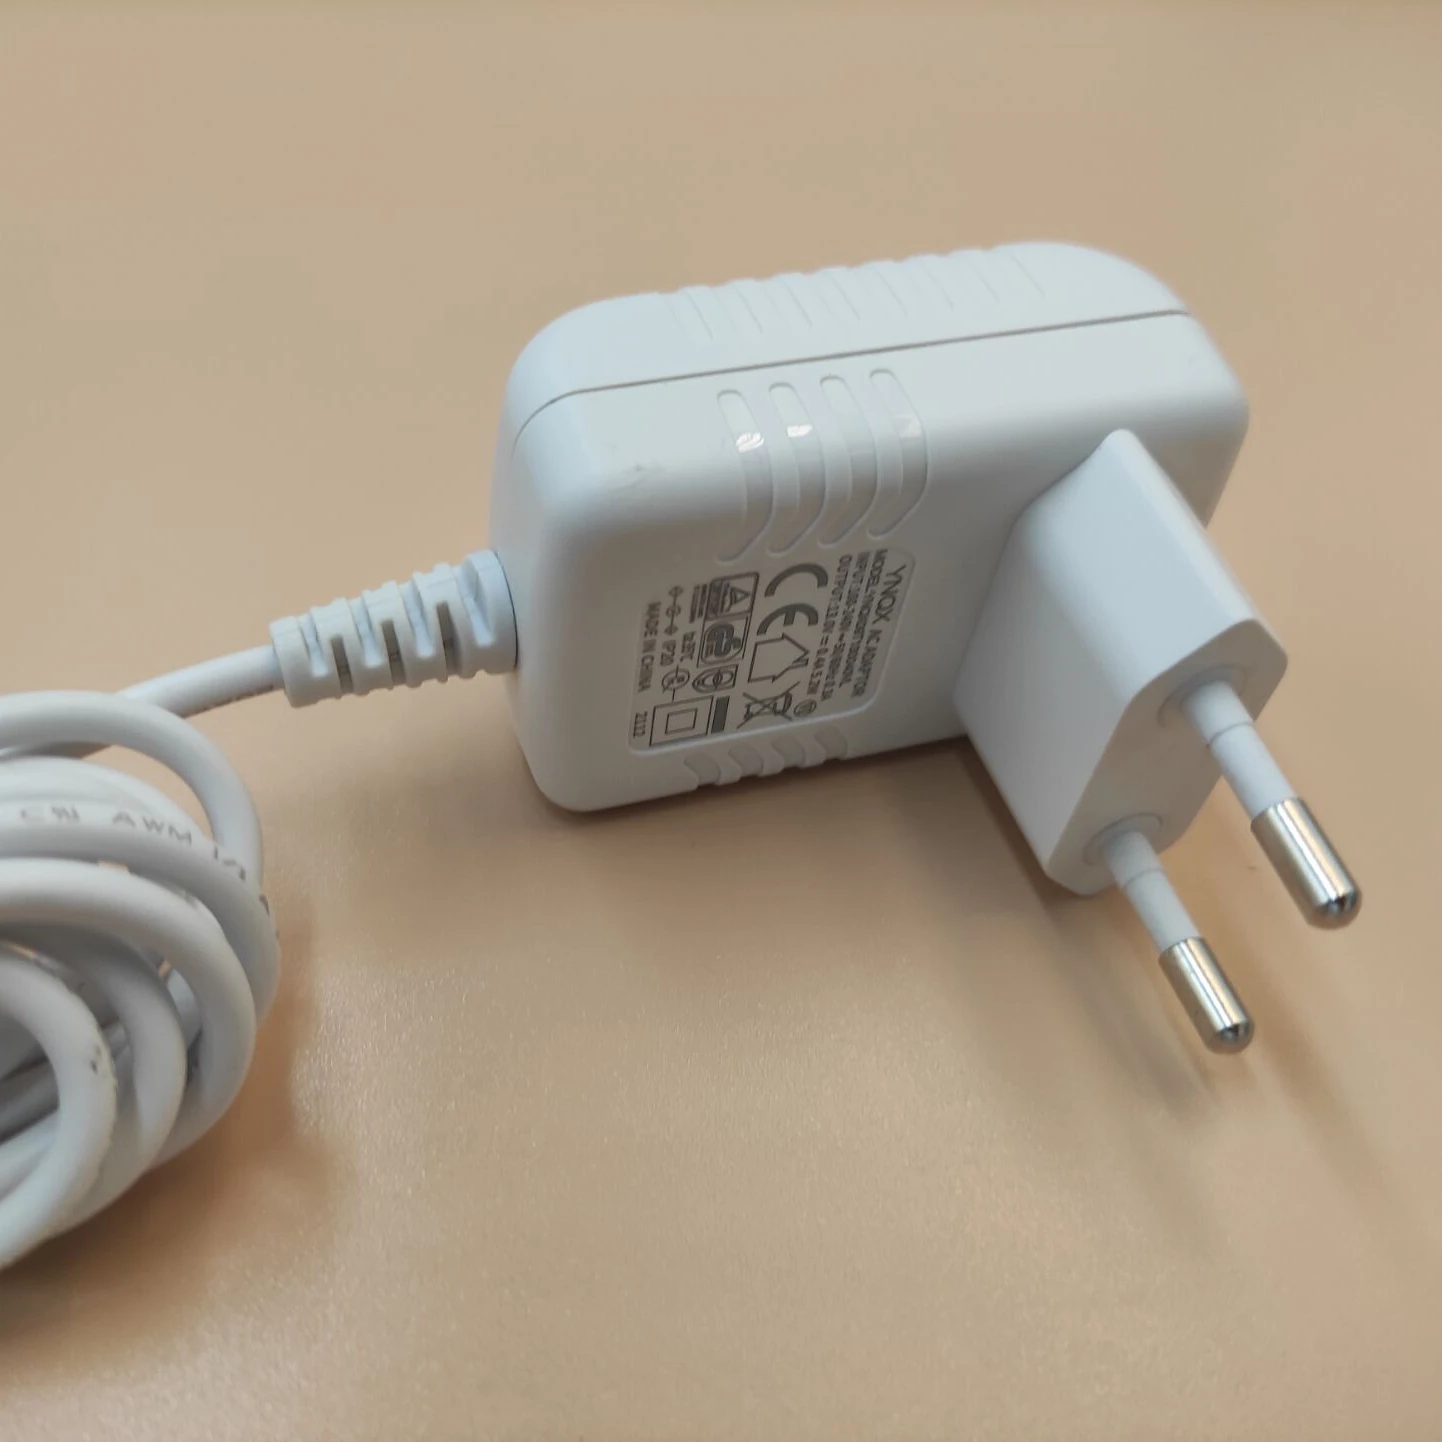 Hot selling AC DC Adapter 13V Switching Power Adaptor  0.4A   EU standard   white color asap adapter  charger adapter europe